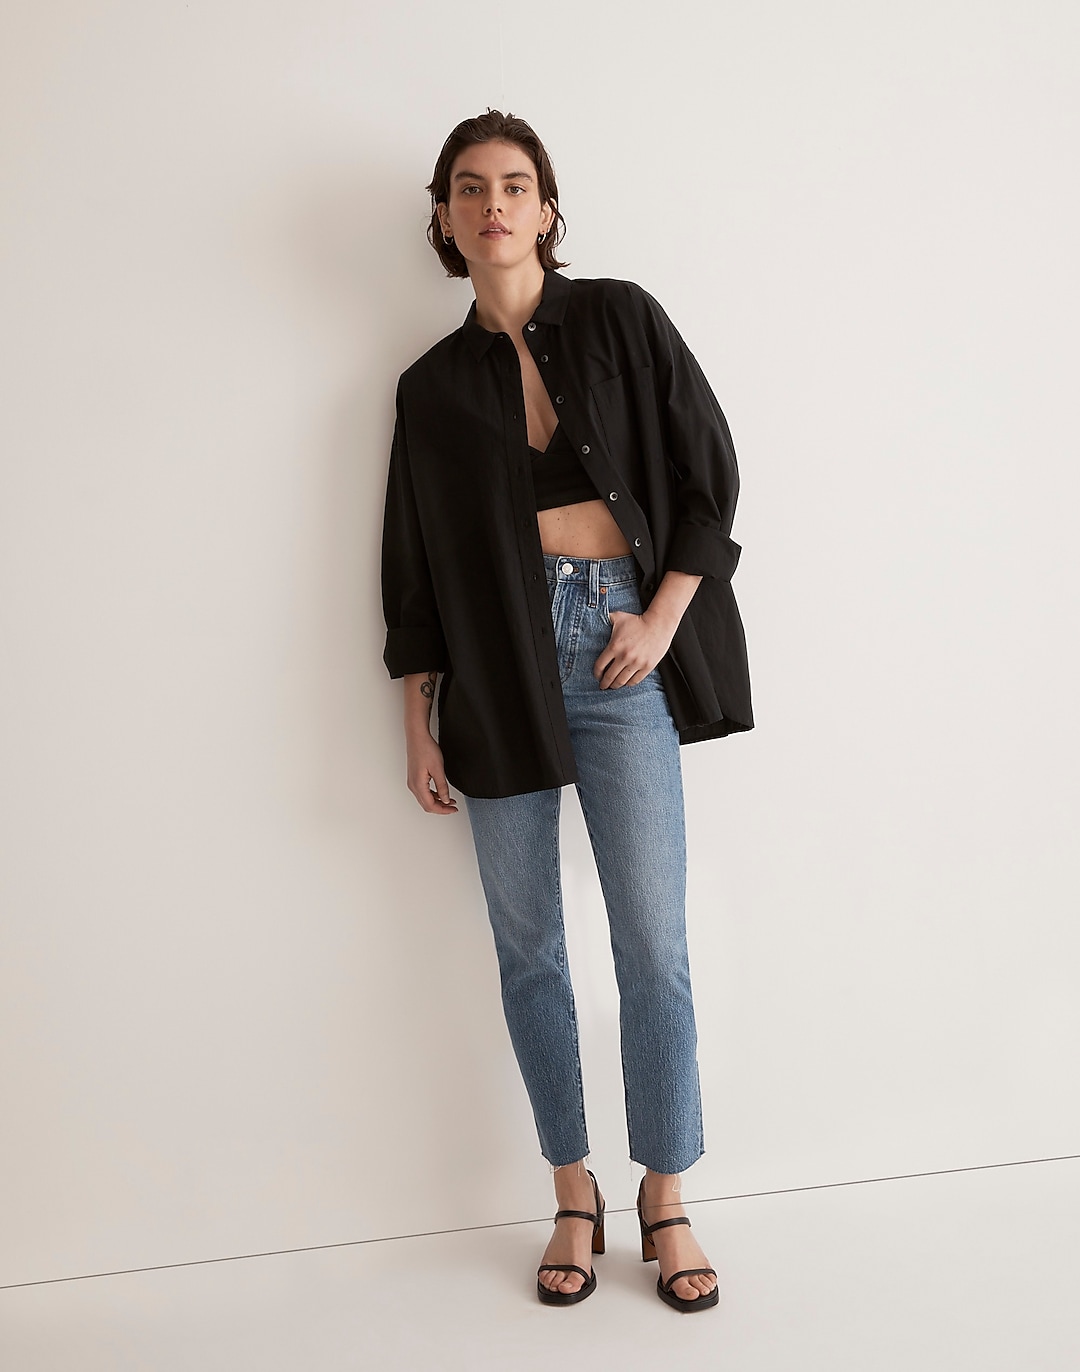 The Perfect Vintage Jean in Earlside Wash: Raw-Hem Edition | Madewell